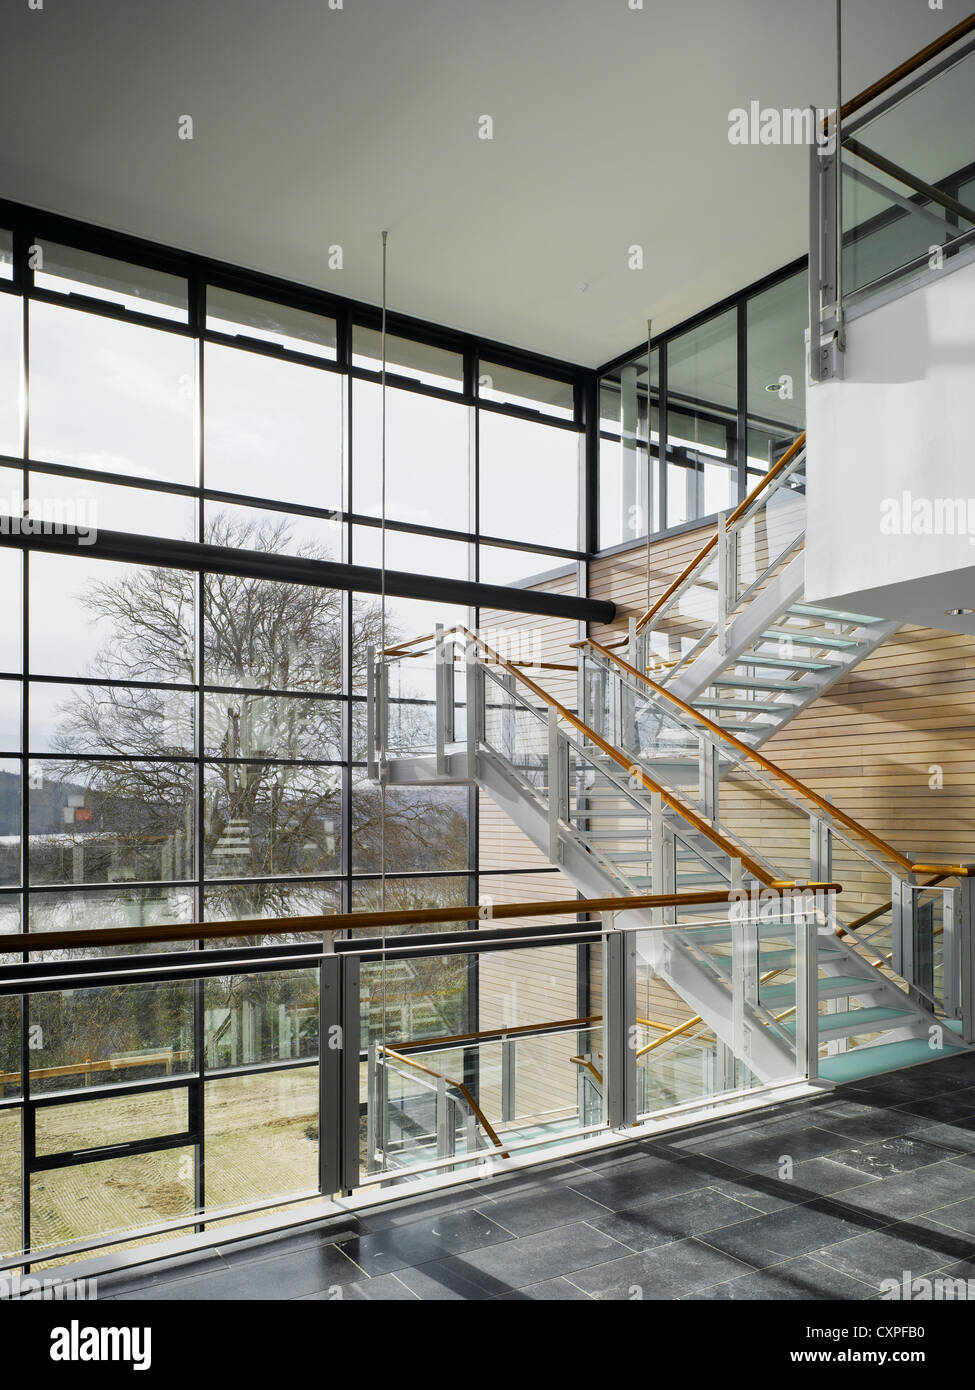 School of Nursing, St. Angela's College, Lough Gill, Ireland. Architect: Moloney O'Beirne Architects, 2007. View to exterior fro Stock Photo